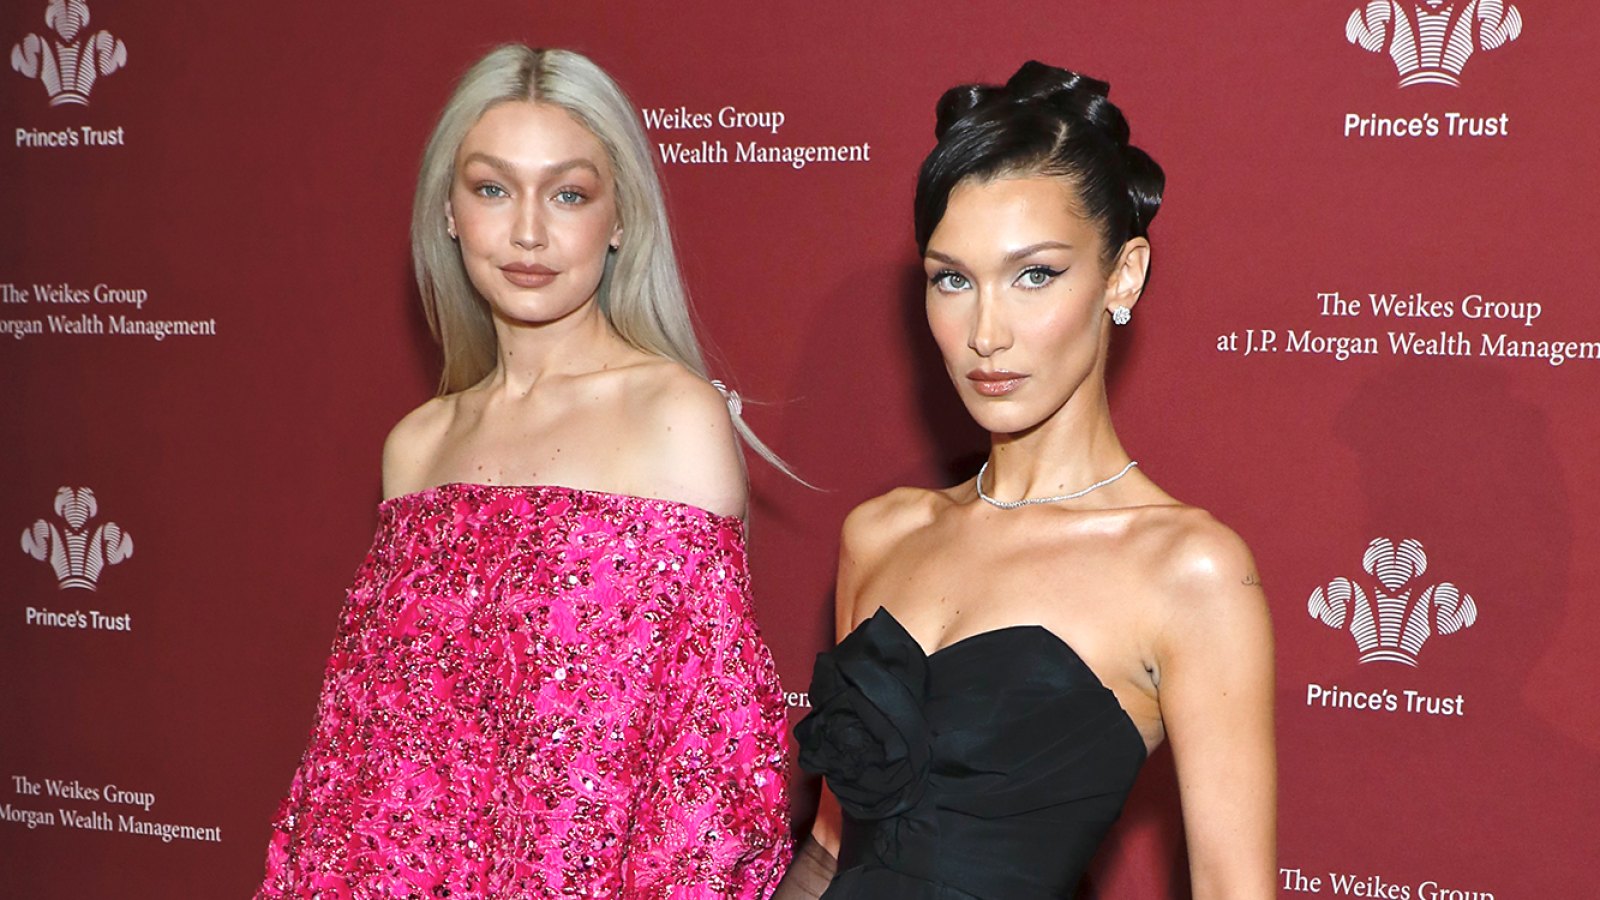 Bella and Gigi Hadid team up for Versace campaign